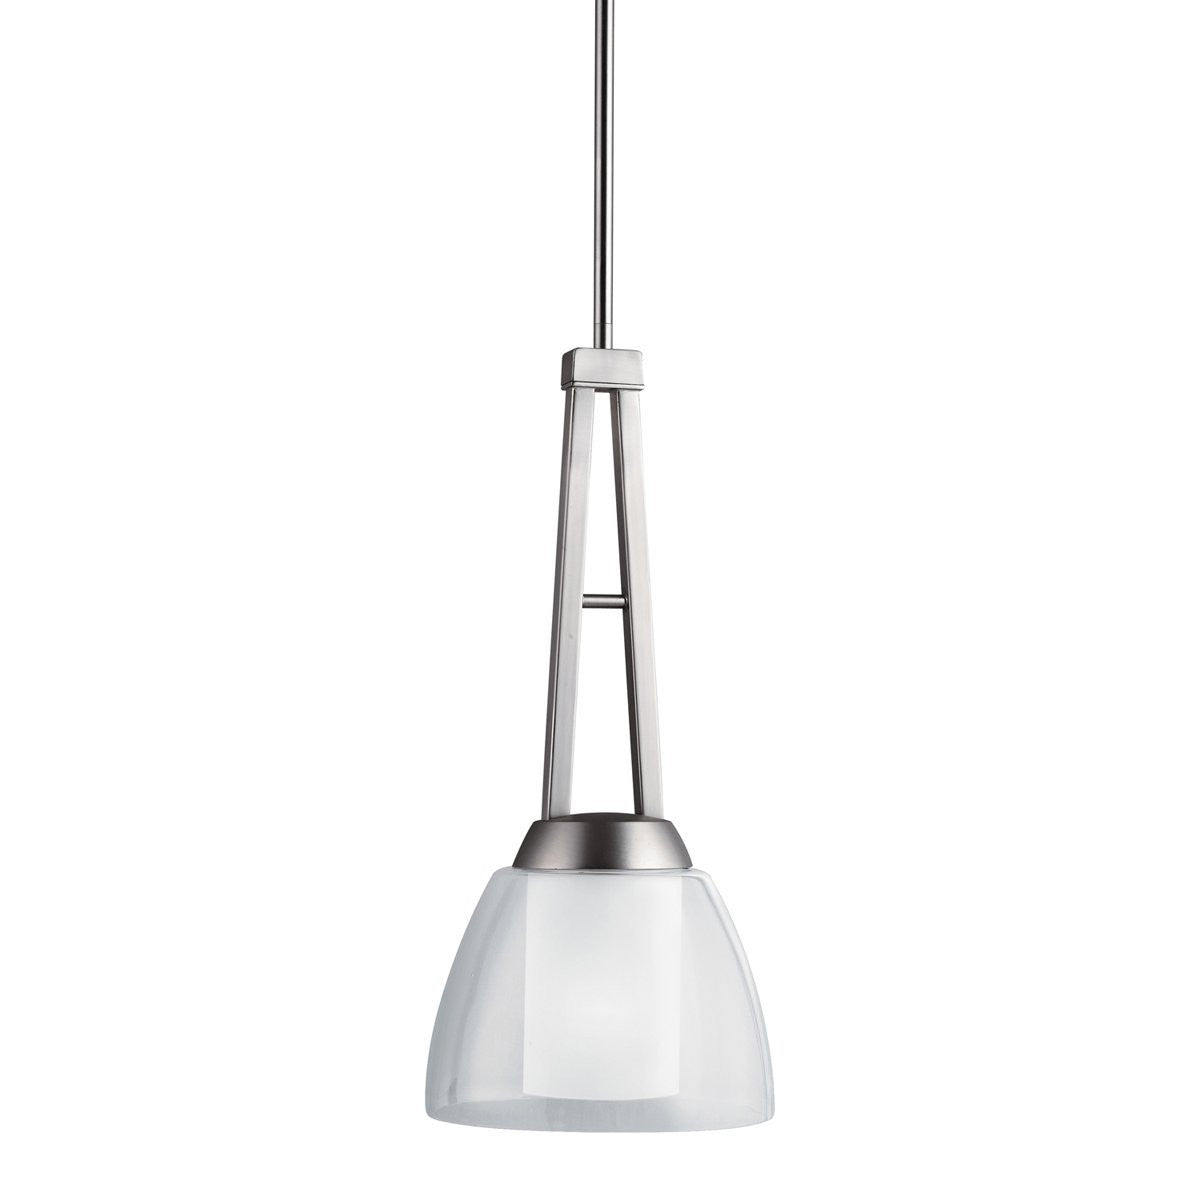 Aztec by Kichler Lighting 3597NI One Light Lucia Collection Hanging Mini Pendant in Brushed Nickel Finish